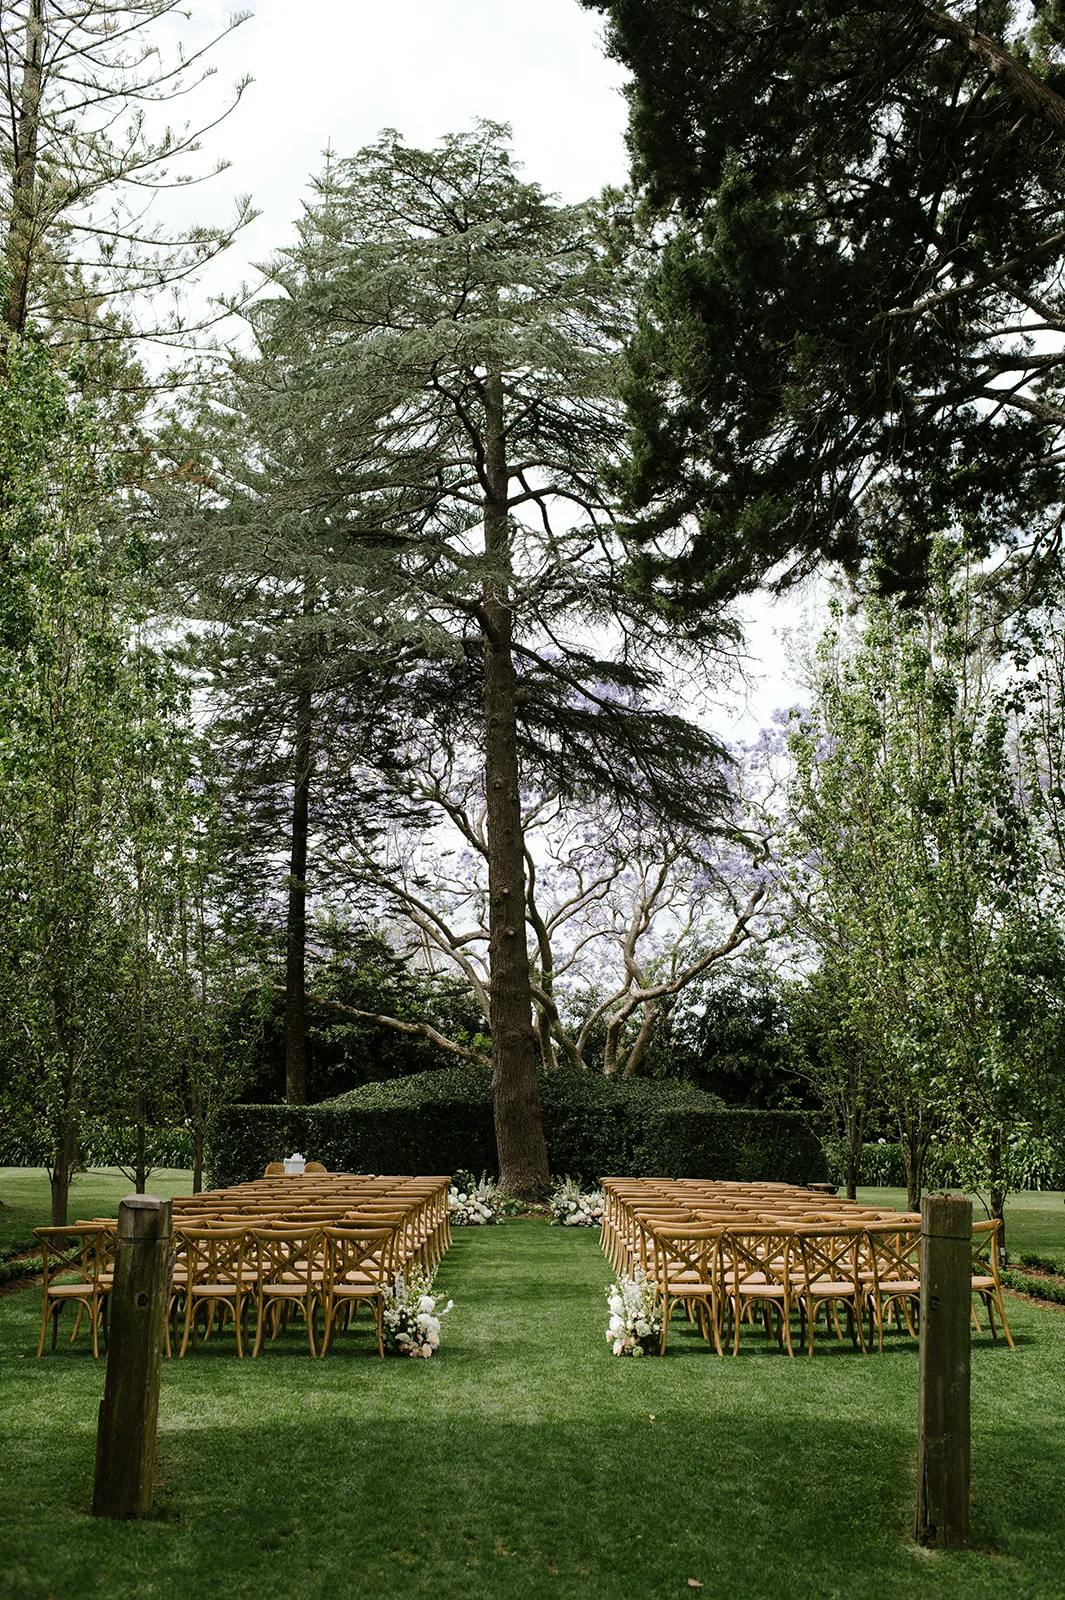 An outdoor wedding setup with wooden chairs arranged in neat rows on a grassy lawn, facing a tall, majestic tree in the center. The area is surrounded by lush greenery, including trees and bushes, creating a serene and natural ambiance. Flower arrangements line the aisle.